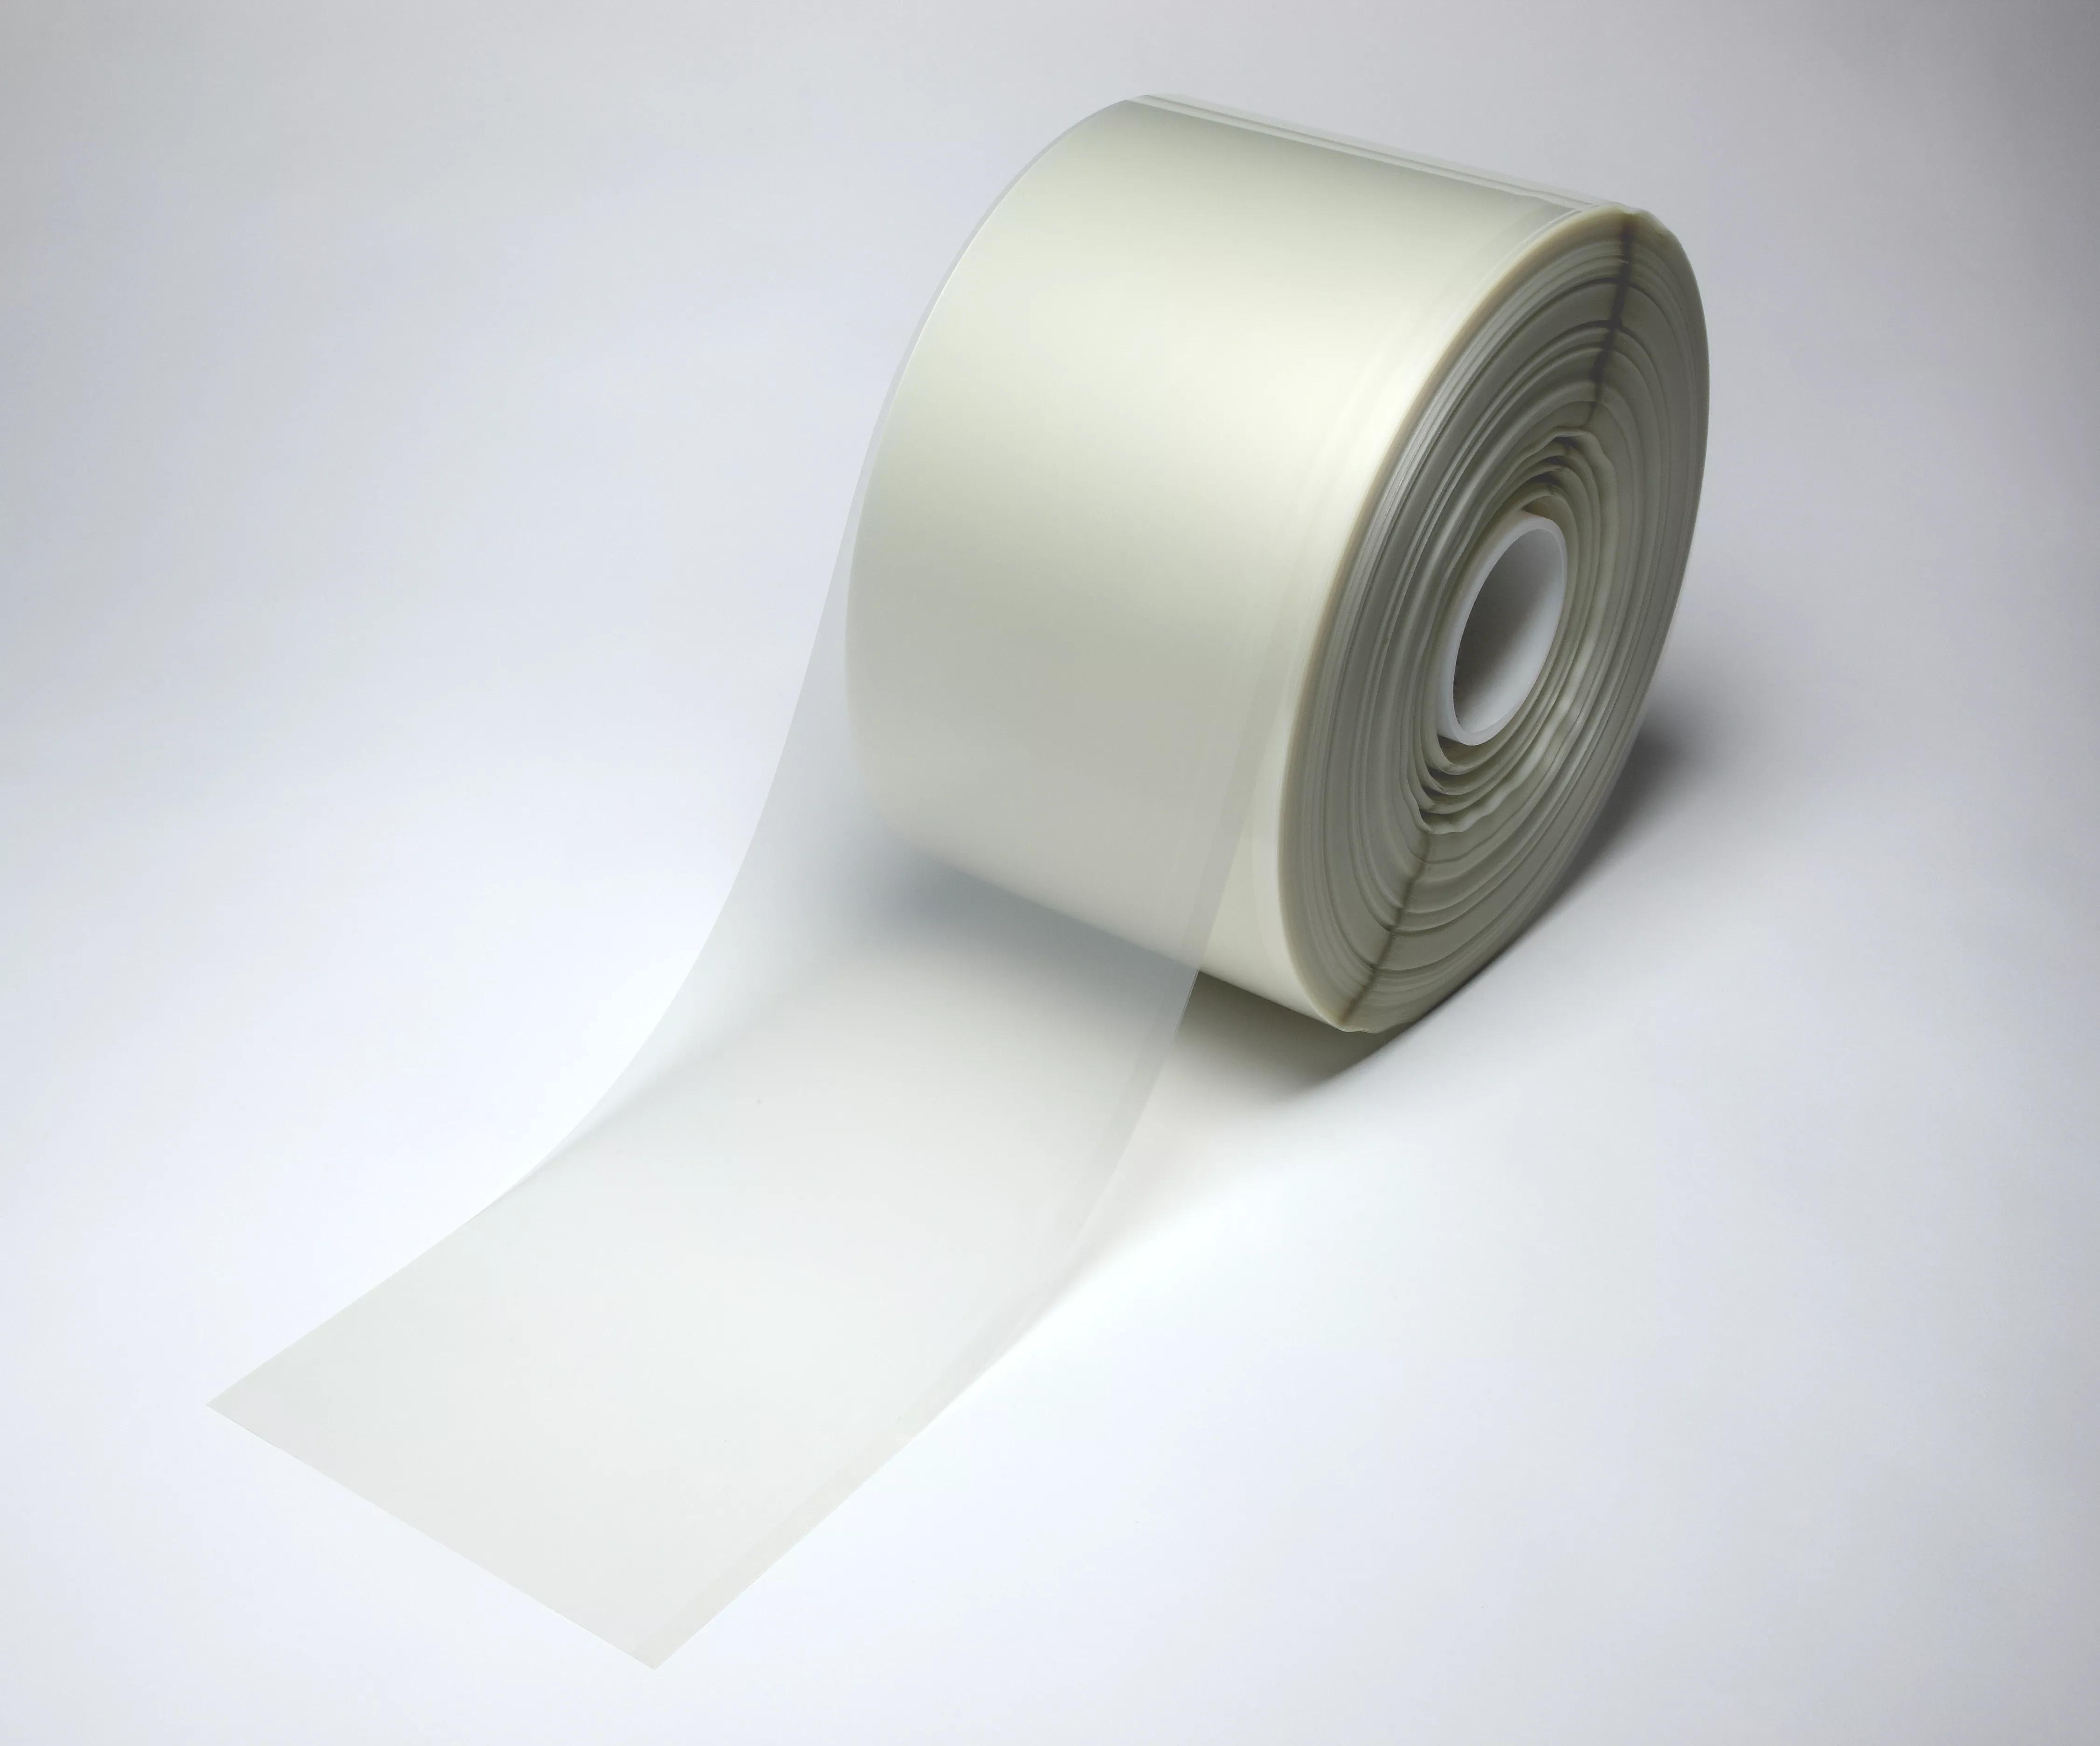 3M™ Optically Clear Adhesive 8211, 12 in x 33 yds, roll